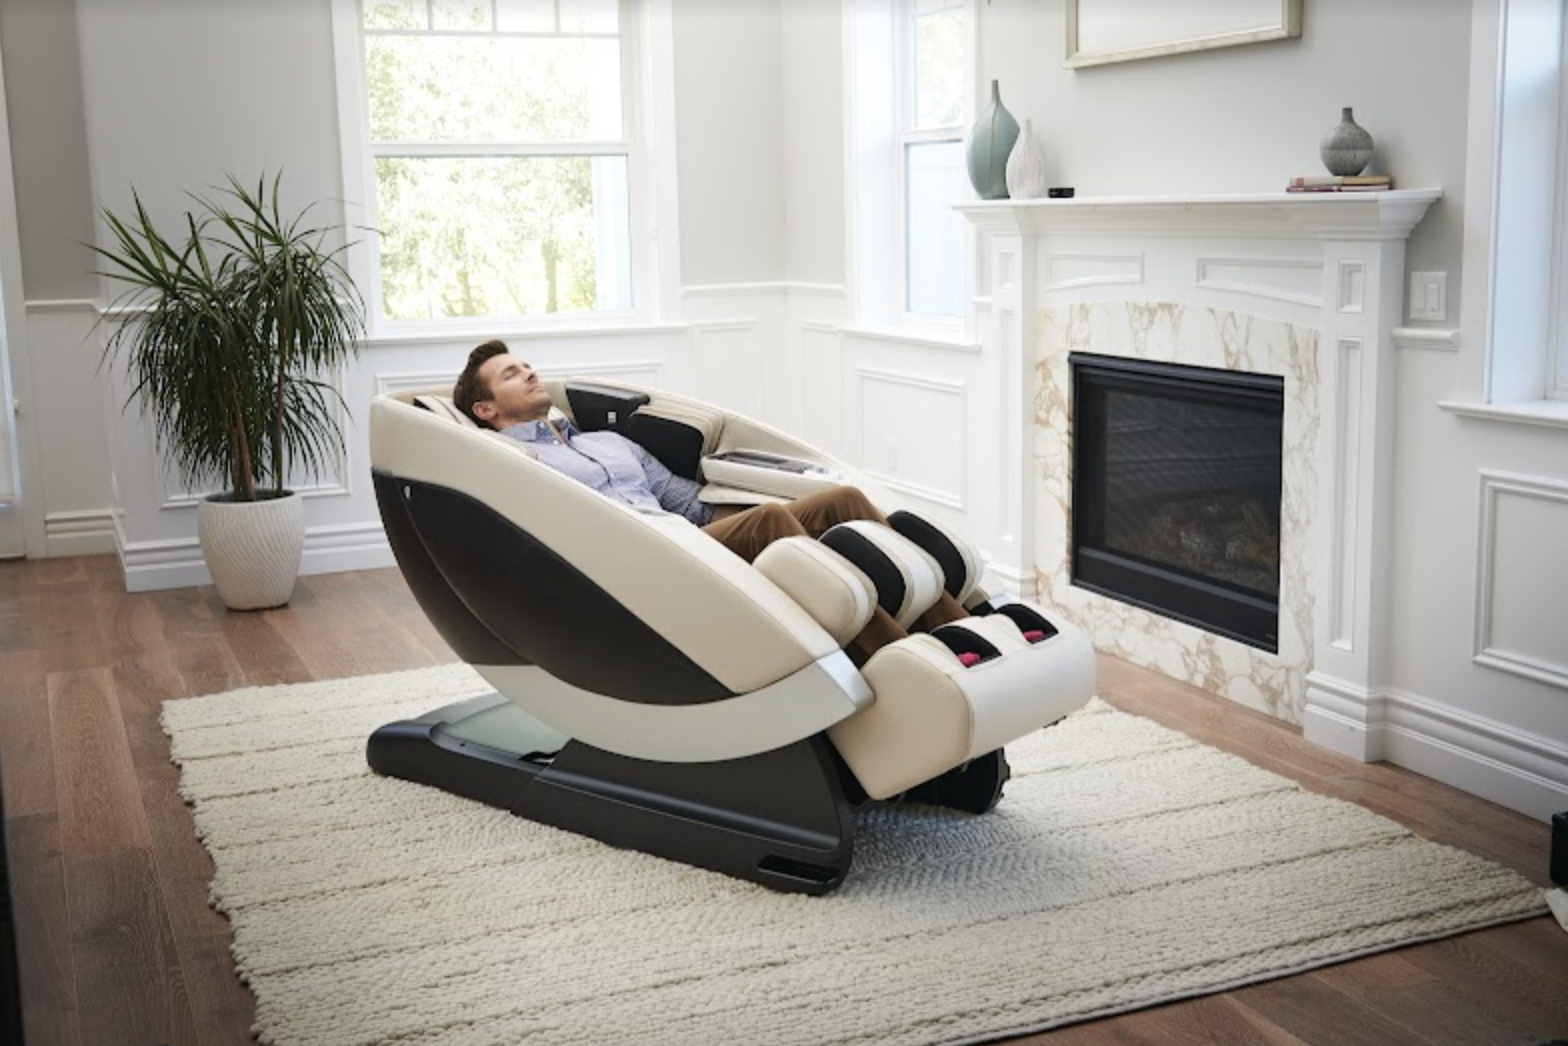 Discover a new realm of relaxation and rejuvenation with the Super Novo Massage Chair. This state-of-the-art chair takes massage technology to unprecedented heights, offering an unparalleled experience that will leave you feeling invigorated and refreshed.